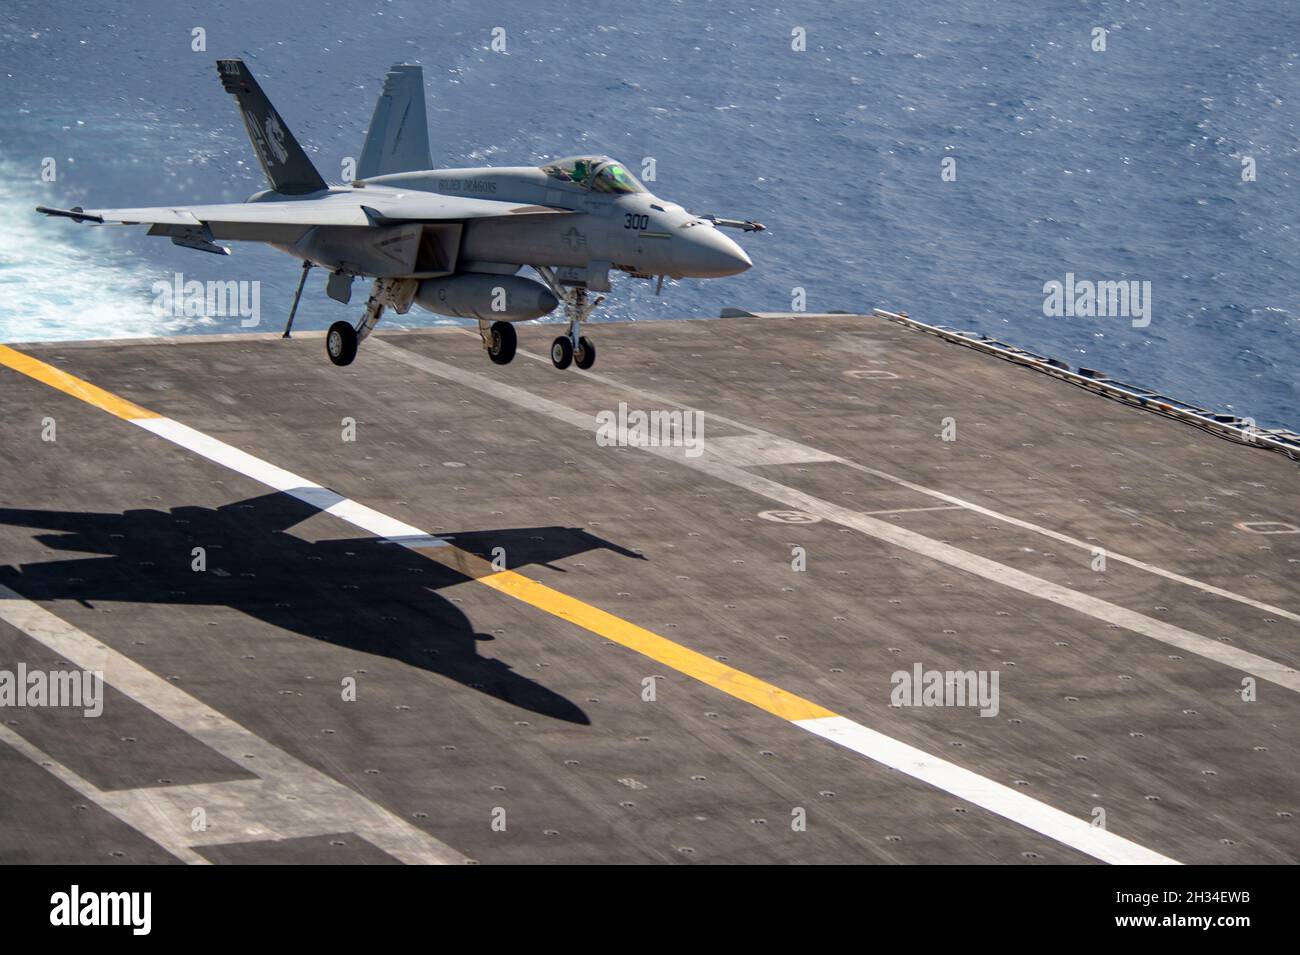 South China Sea, United States. 25th Oct, 2021. A U.S. Navy F/A-18E Super Hornet fighter jet, attached to the Golden Dragons of Strike Fighter Squadron 192, lands on the flight deck of the Nimitz-class aircraft carrier USS Carl Vinson during routine patrol October 25, 2021 in the South China Sea. Credit: MC1 Tyler Fraser/Planetpix/Alamy Live News Credit: Planetpix/Alamy Live News Stock Photo